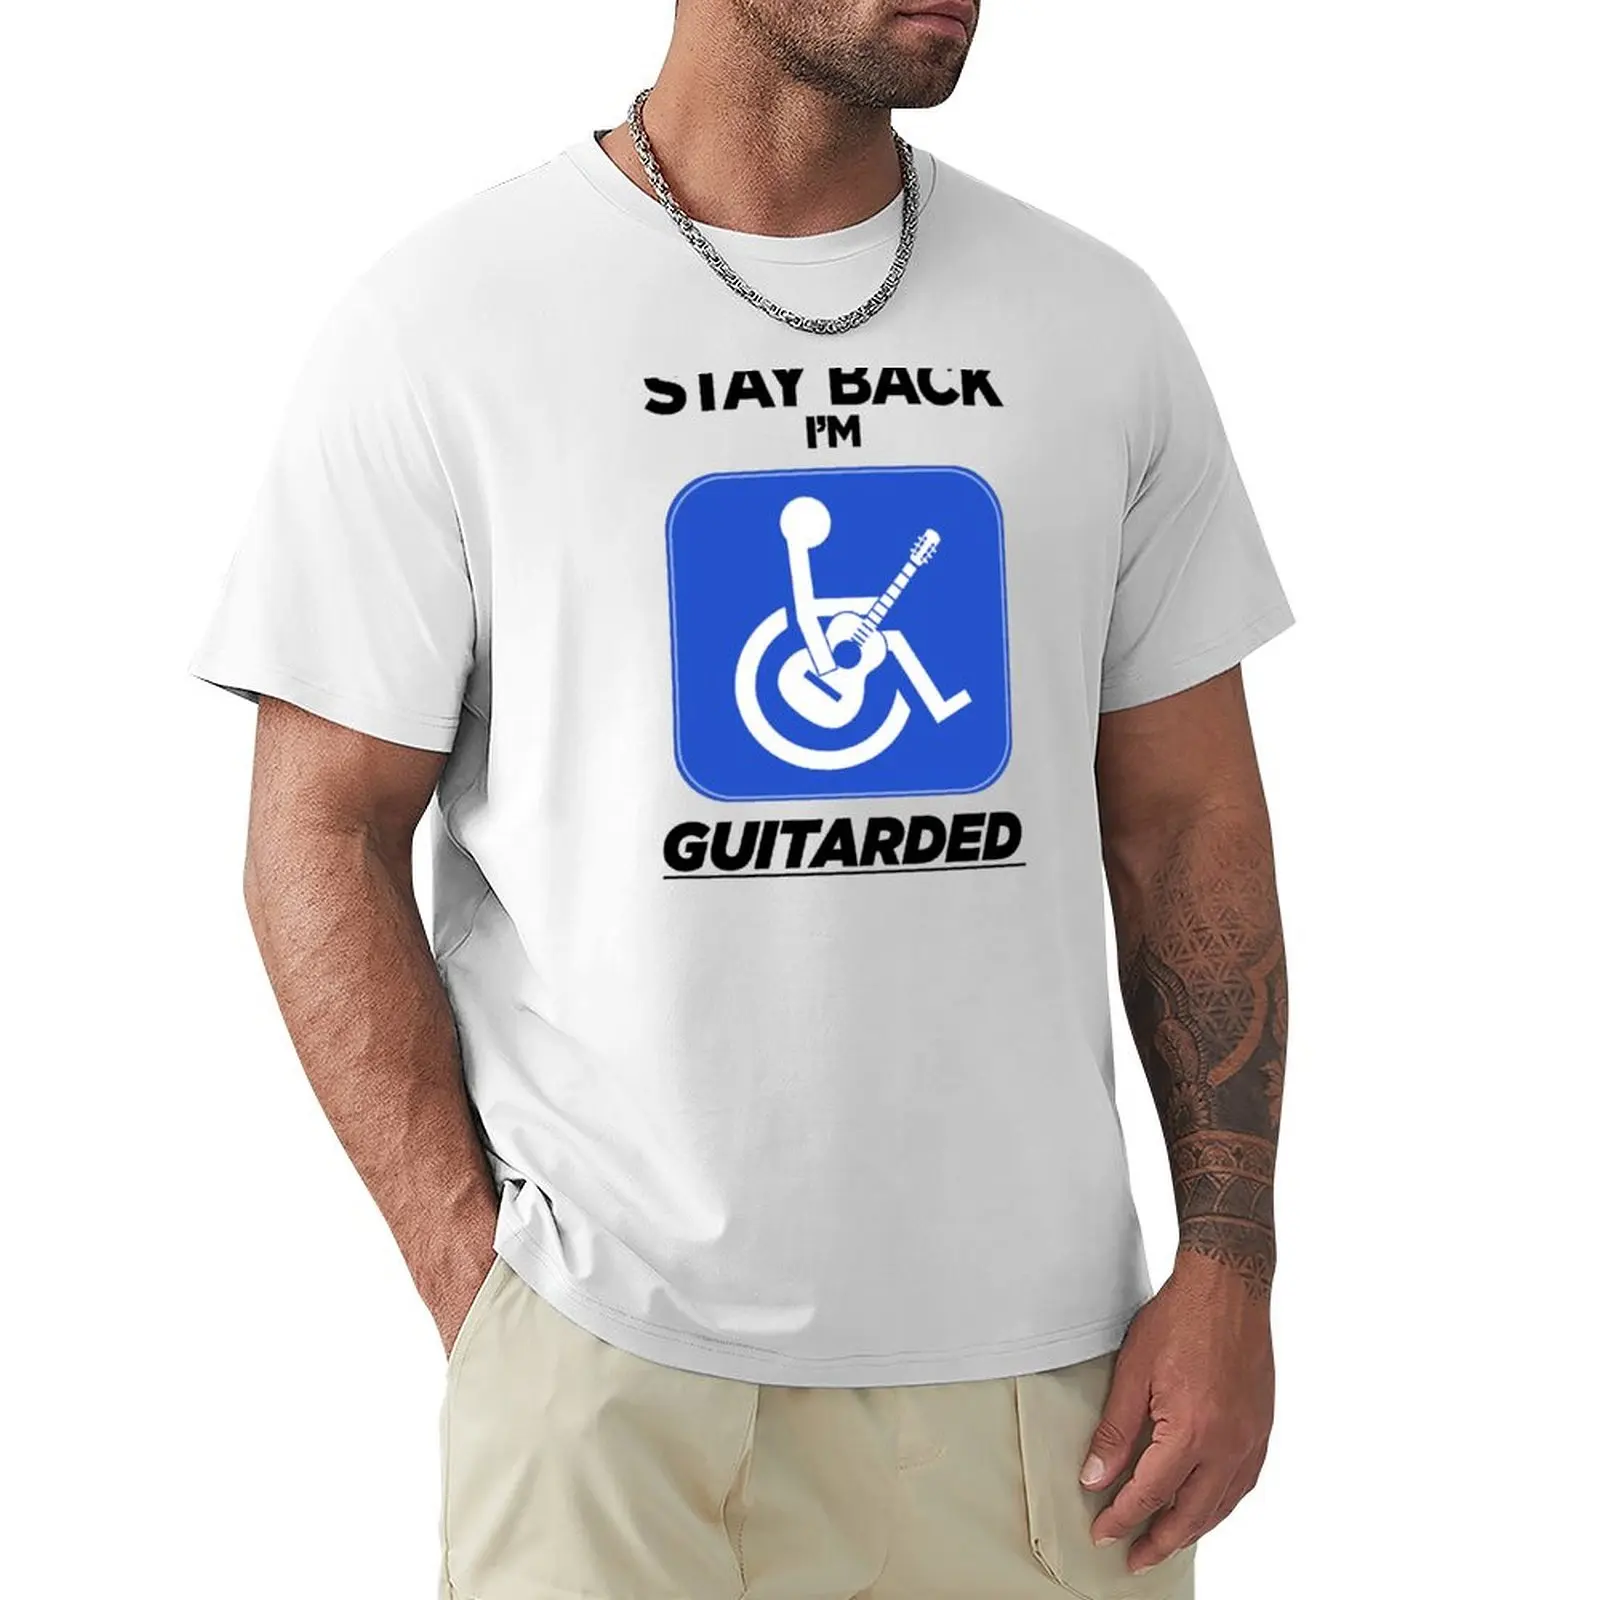 

Stay Back I'm Guitarded (b) T-Shirt tops hippie clothes quick drying mens cotton t shirts